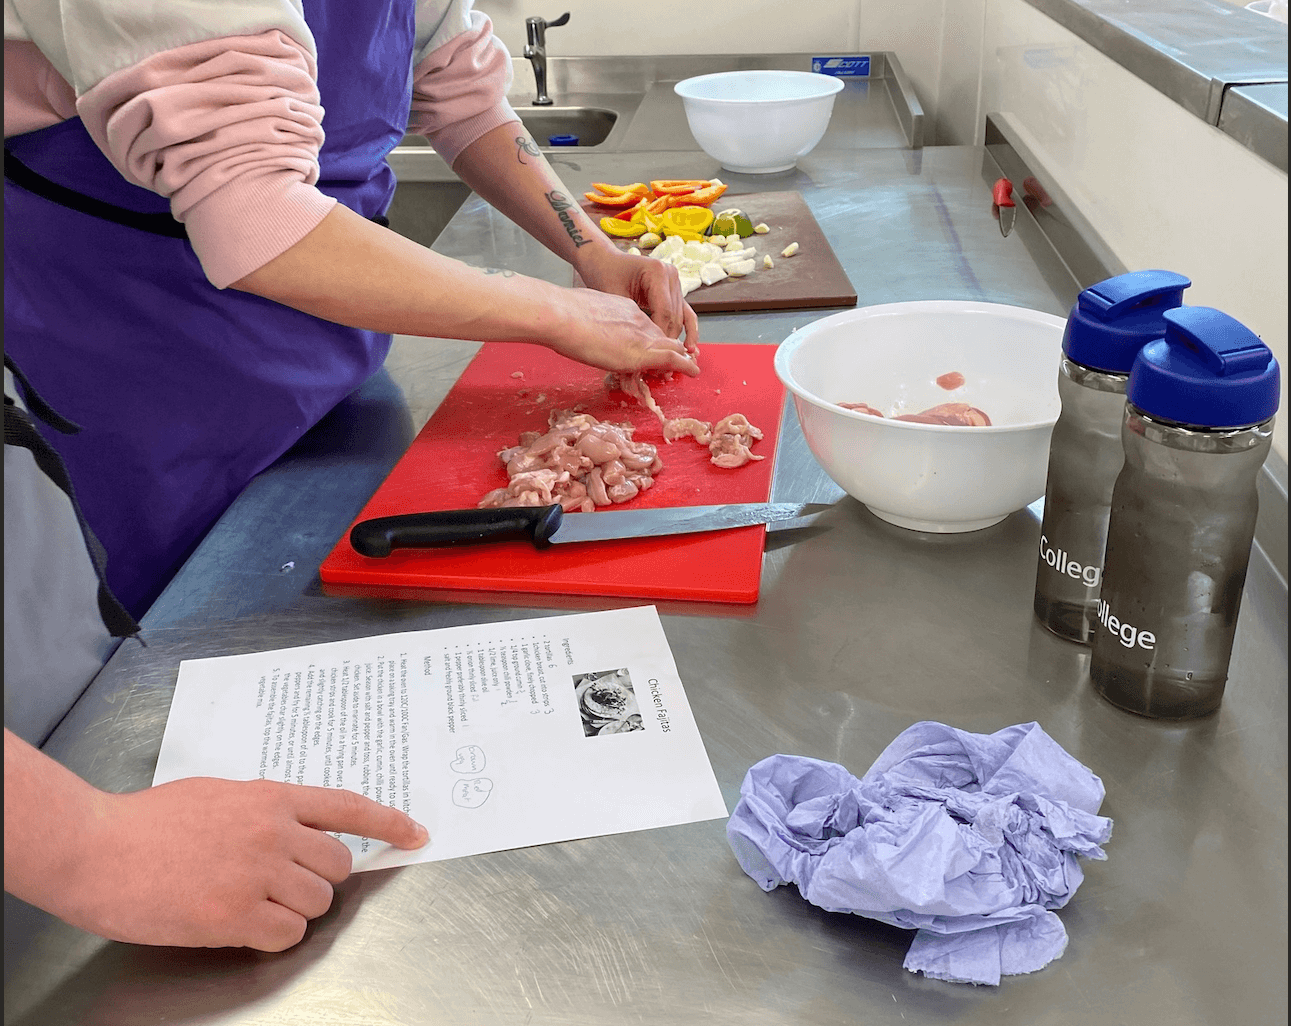 Fife College offers free Numeracy with Cooking course to support families during the Cost of Living crisis